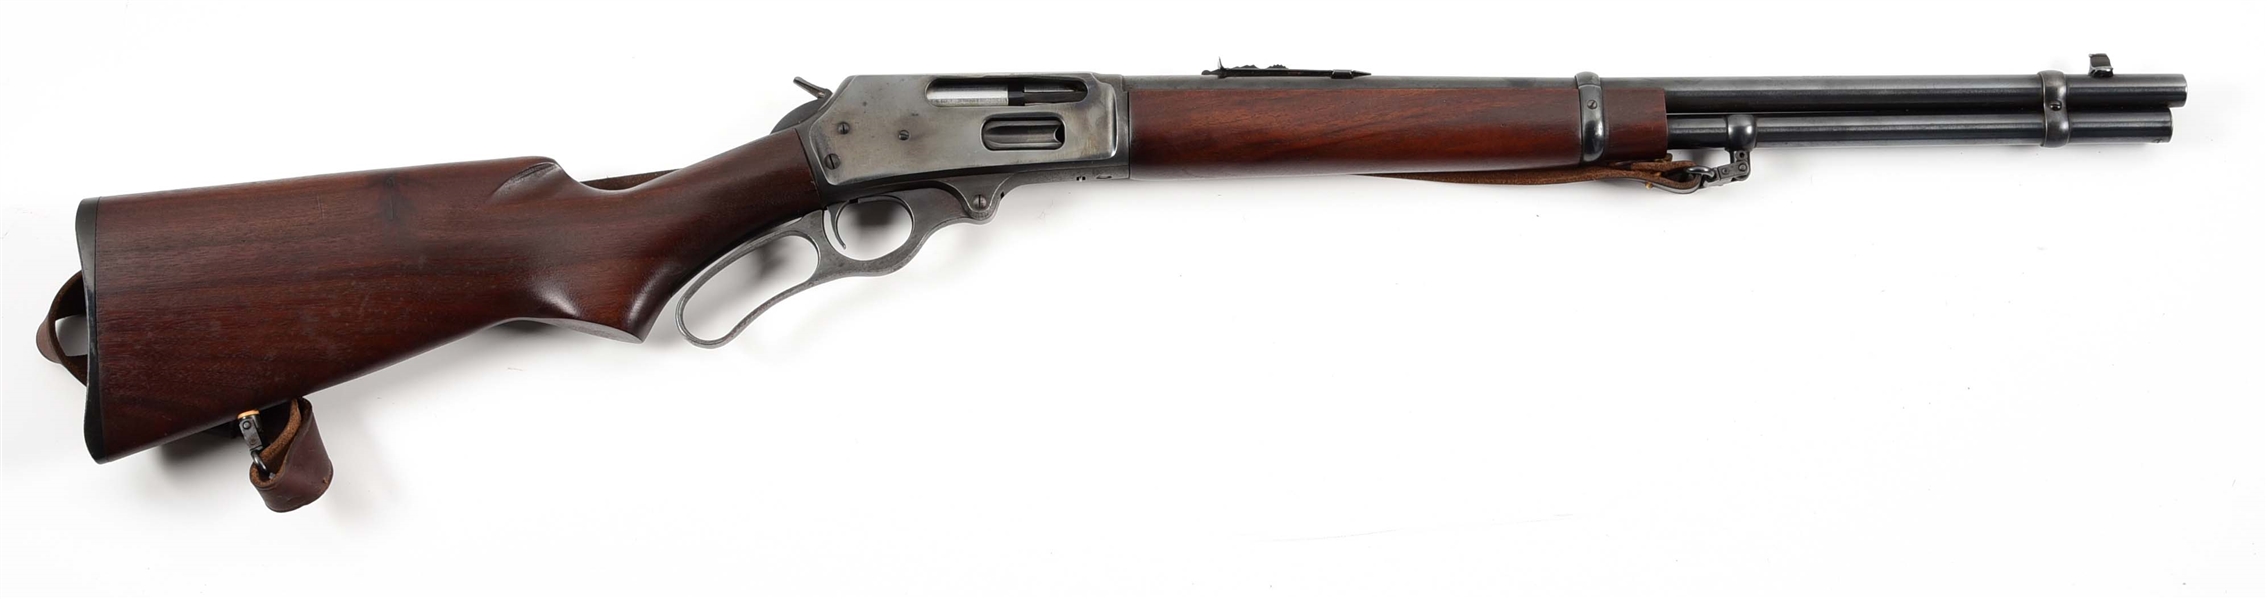 (C) WESTERN AUTO SUPPLY CO. MODEL 200 LEVER ACTION RIFLE